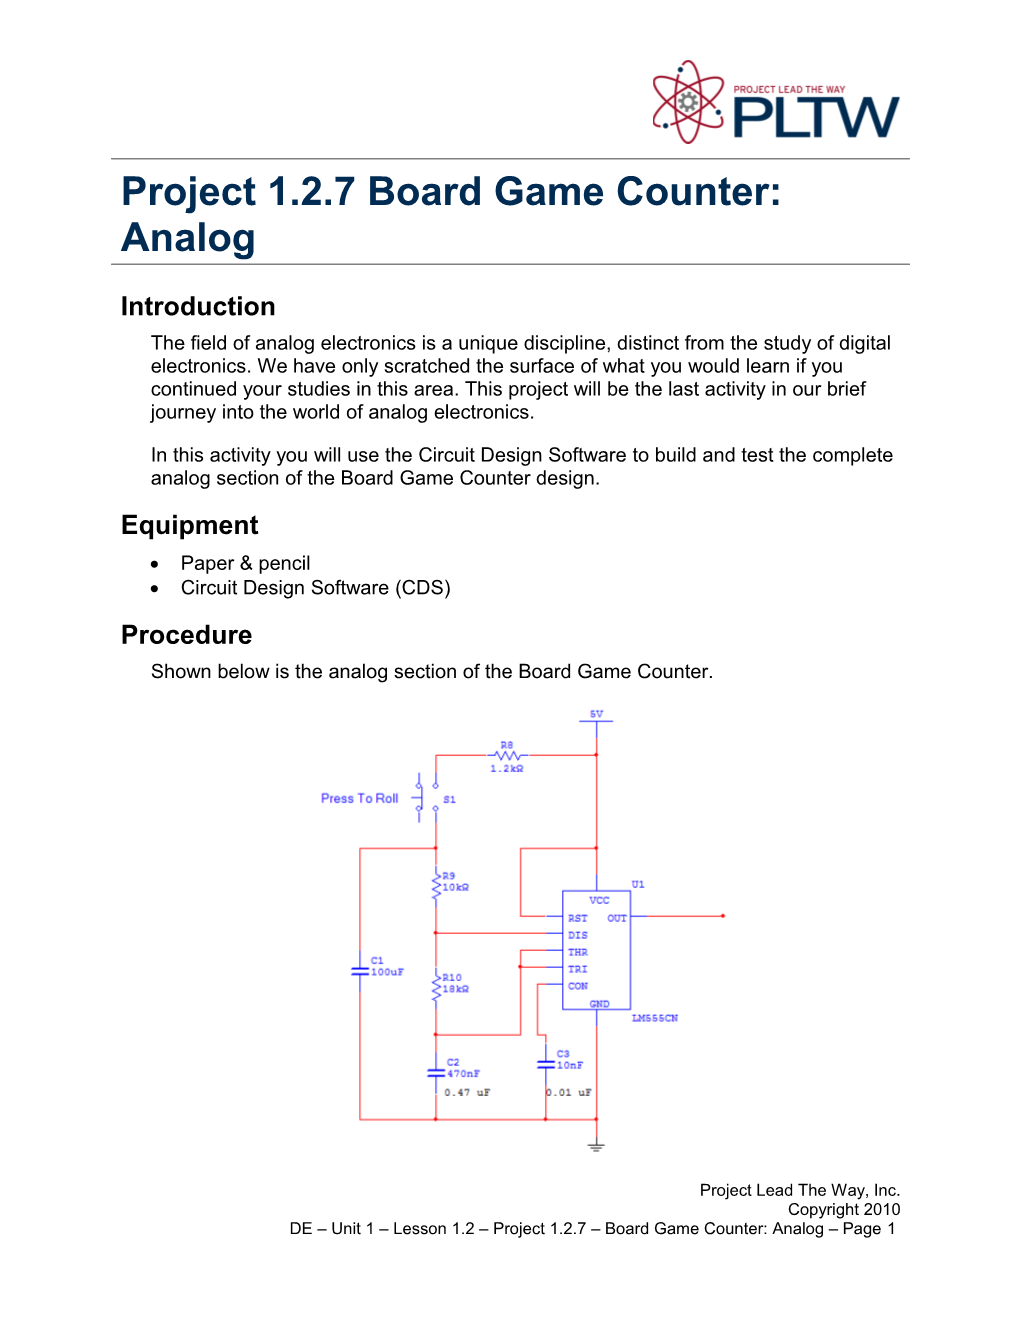 Project 1.2.7 Board Game Counter: Analog